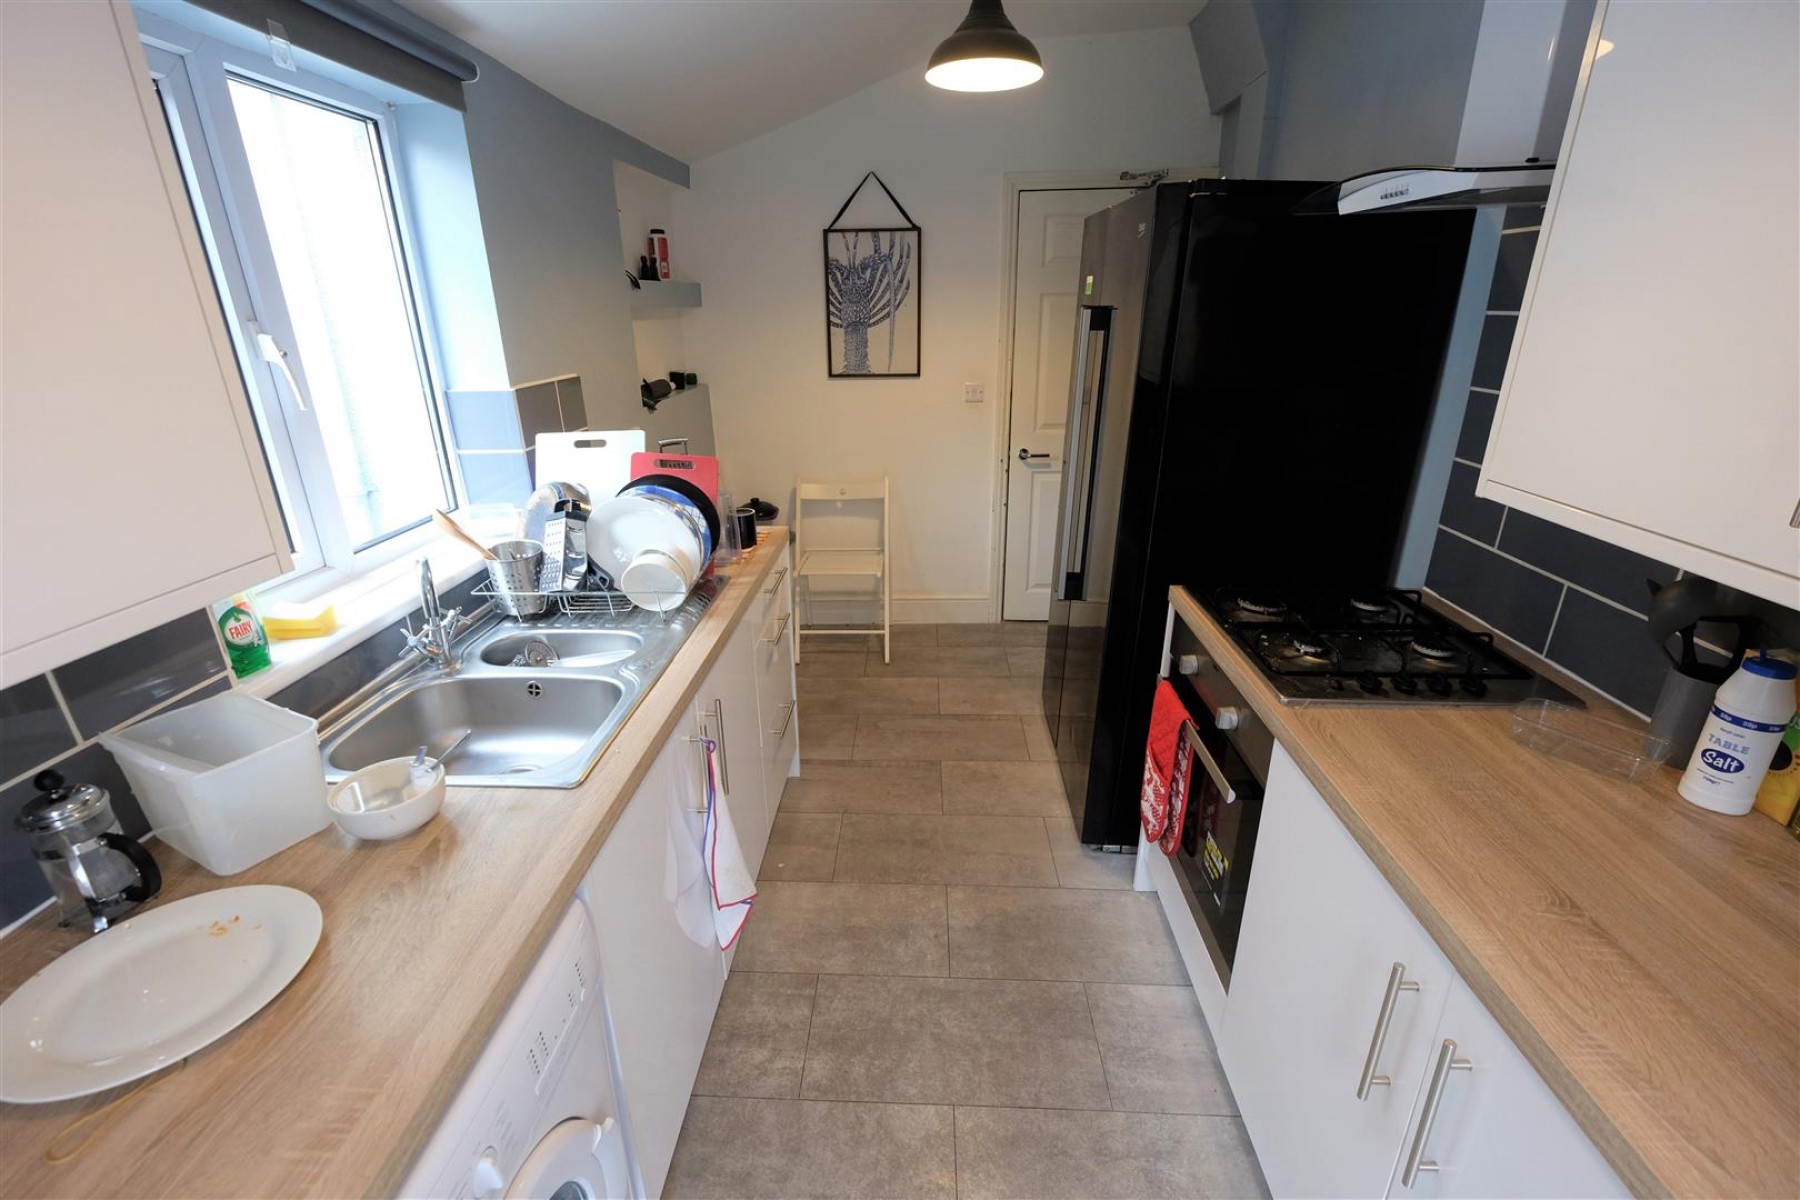 Images for 5 BED / 5 BATH HMO  ( £35k pa ) - REDFIELD